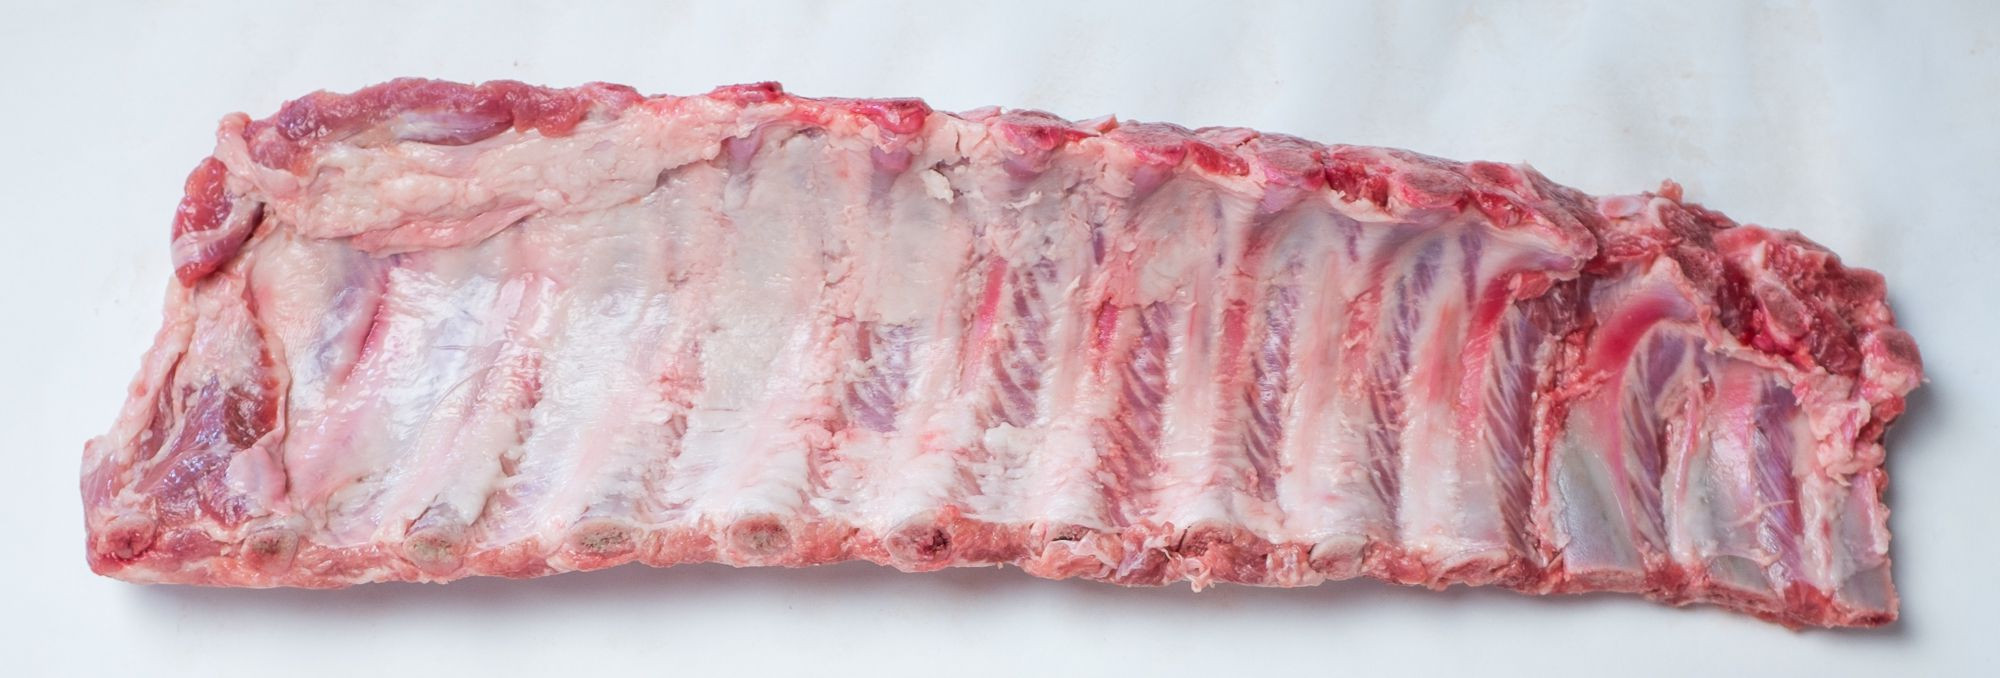 Are Baby Back Ribs Beef Or Pork
 The Ultimate Unabridged Pork Rib Lovers Guide to New York